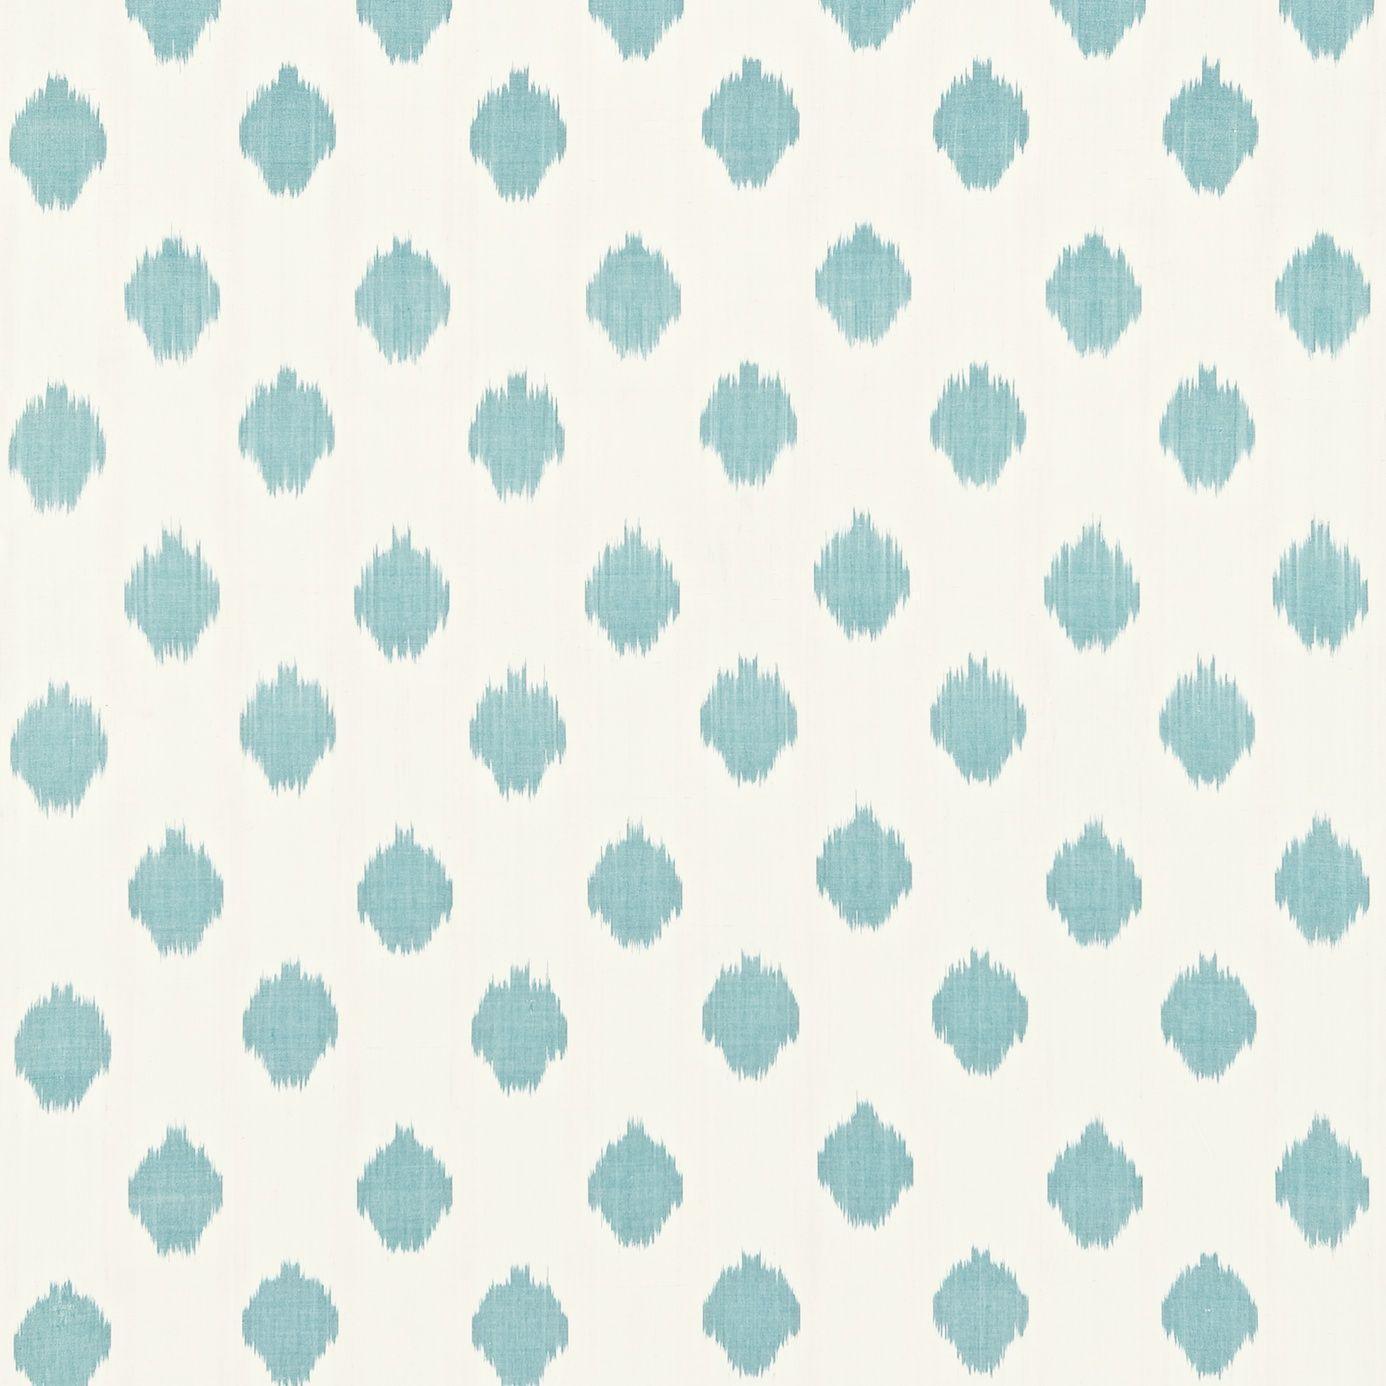 Wallpaper Wednesday: Dhurrie by Scion Chic Living